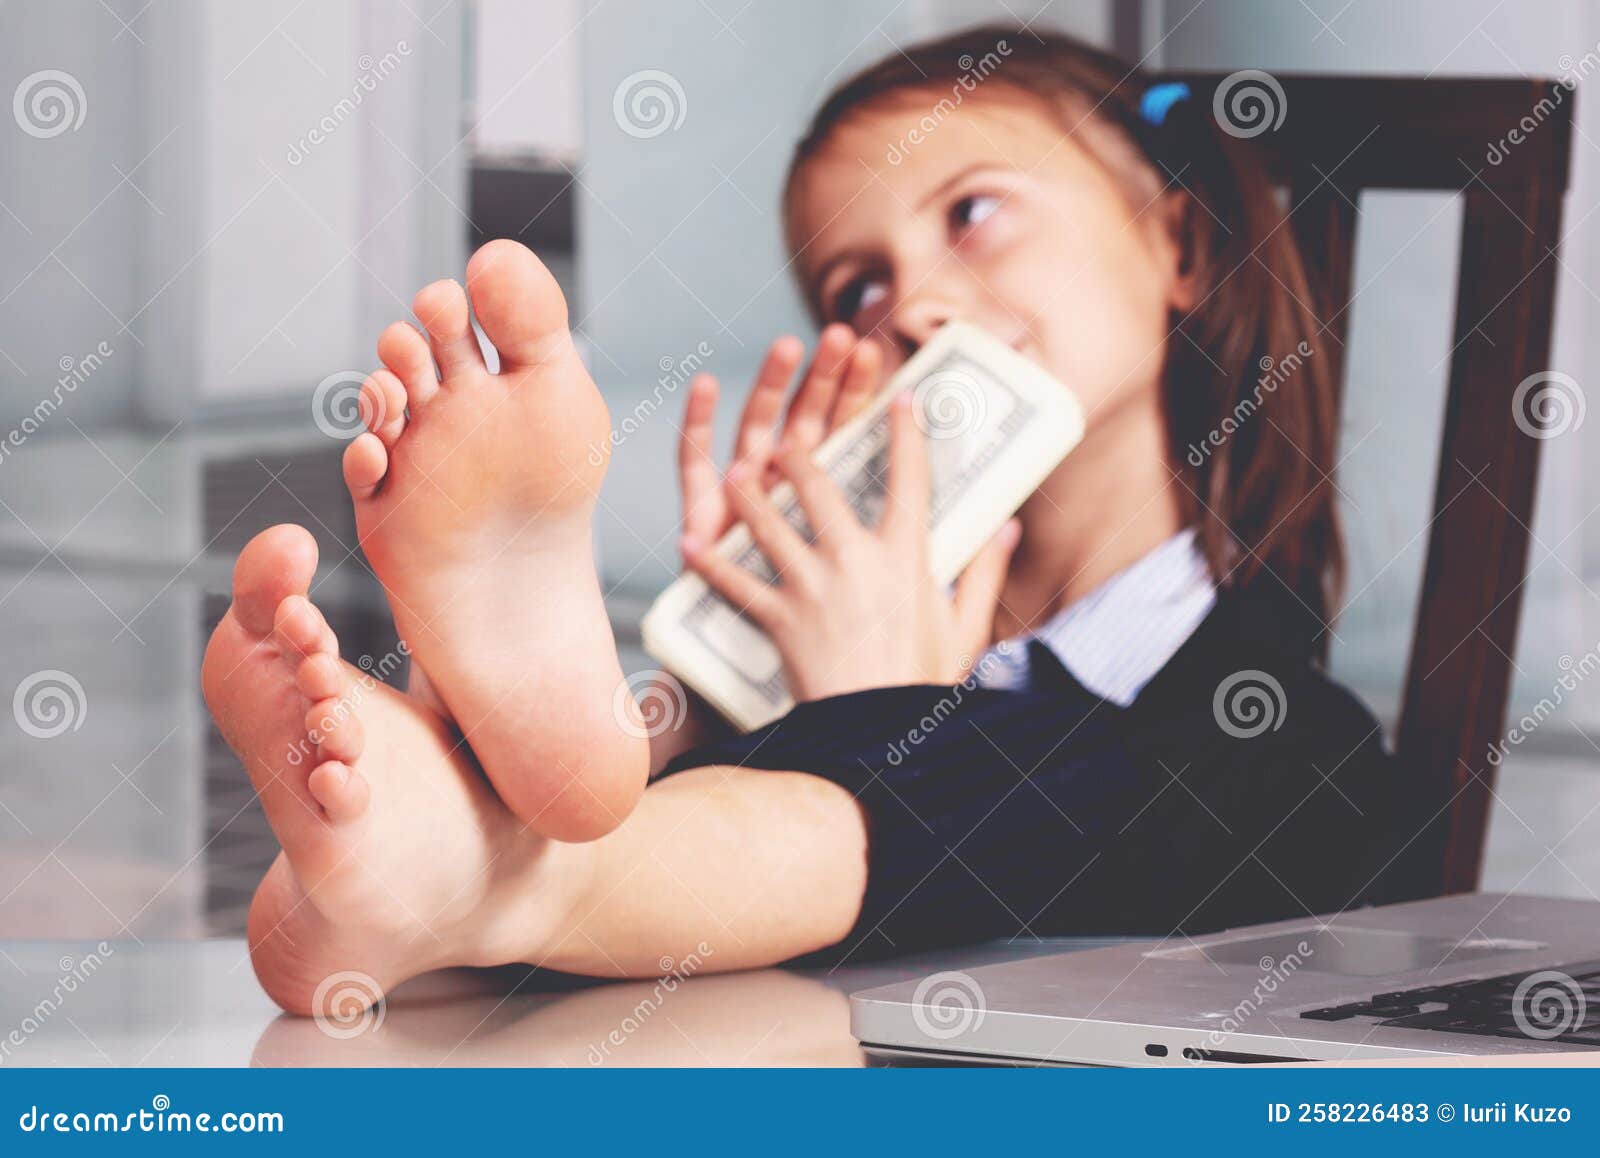 portrait of very happy cute young business girl with bare feet on the table and counts money profit. selective focus on feet